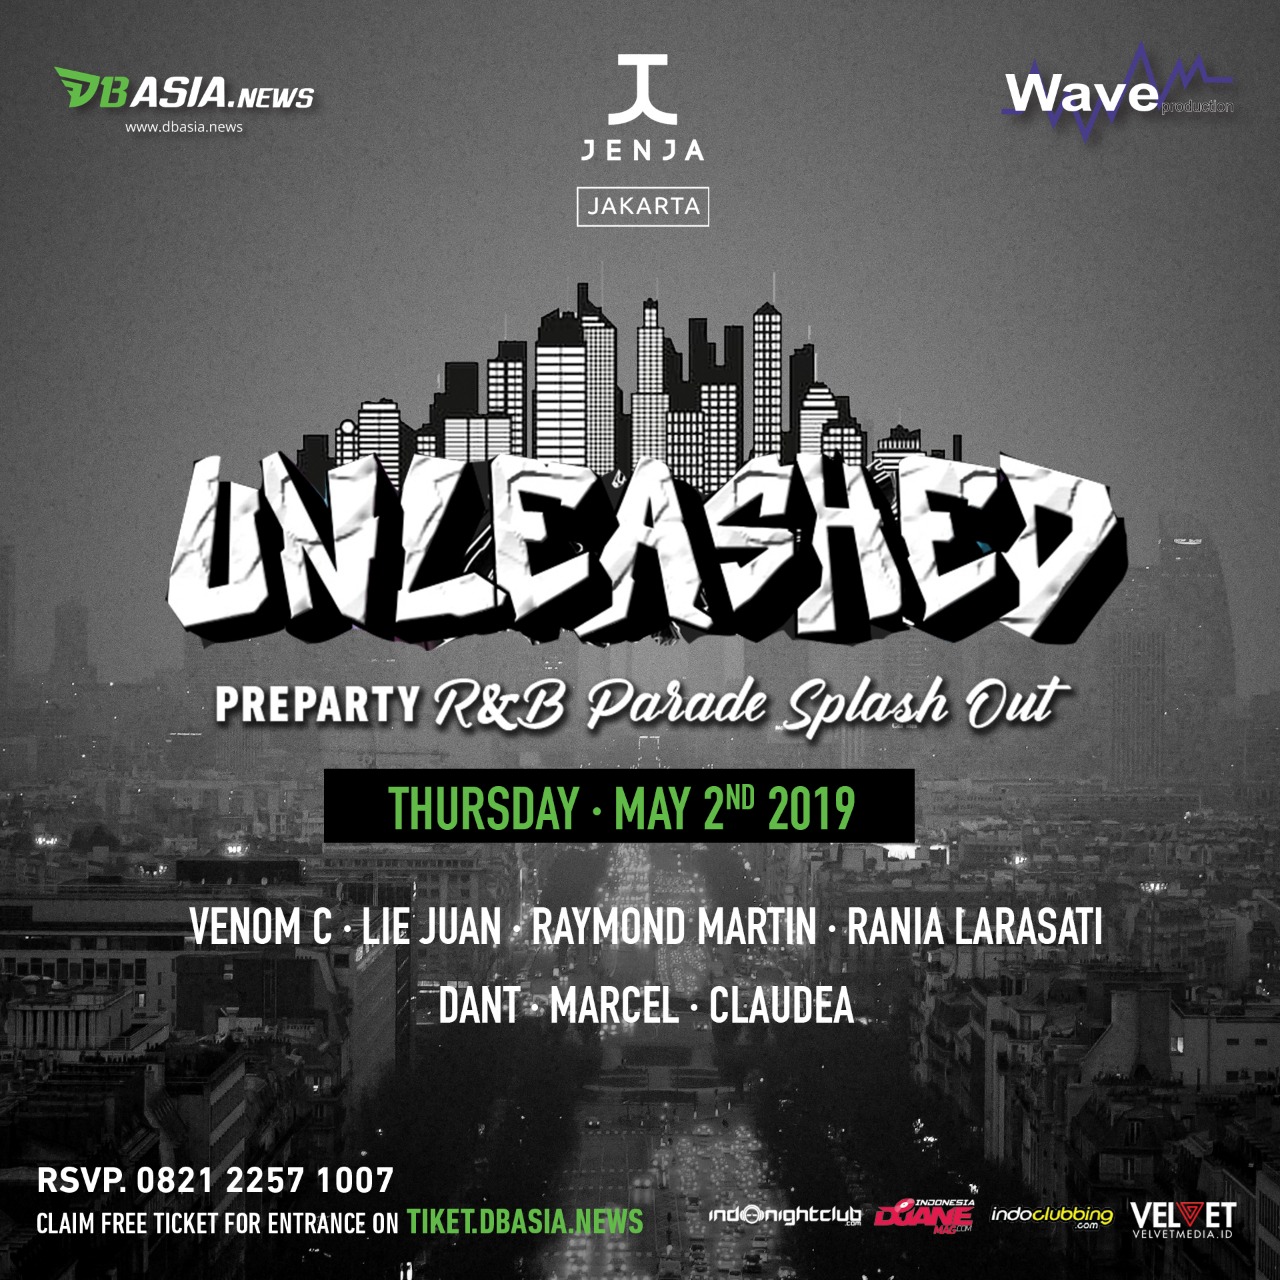 Unleashed Preparty R&B Parade Splash Out with DBAsia.news